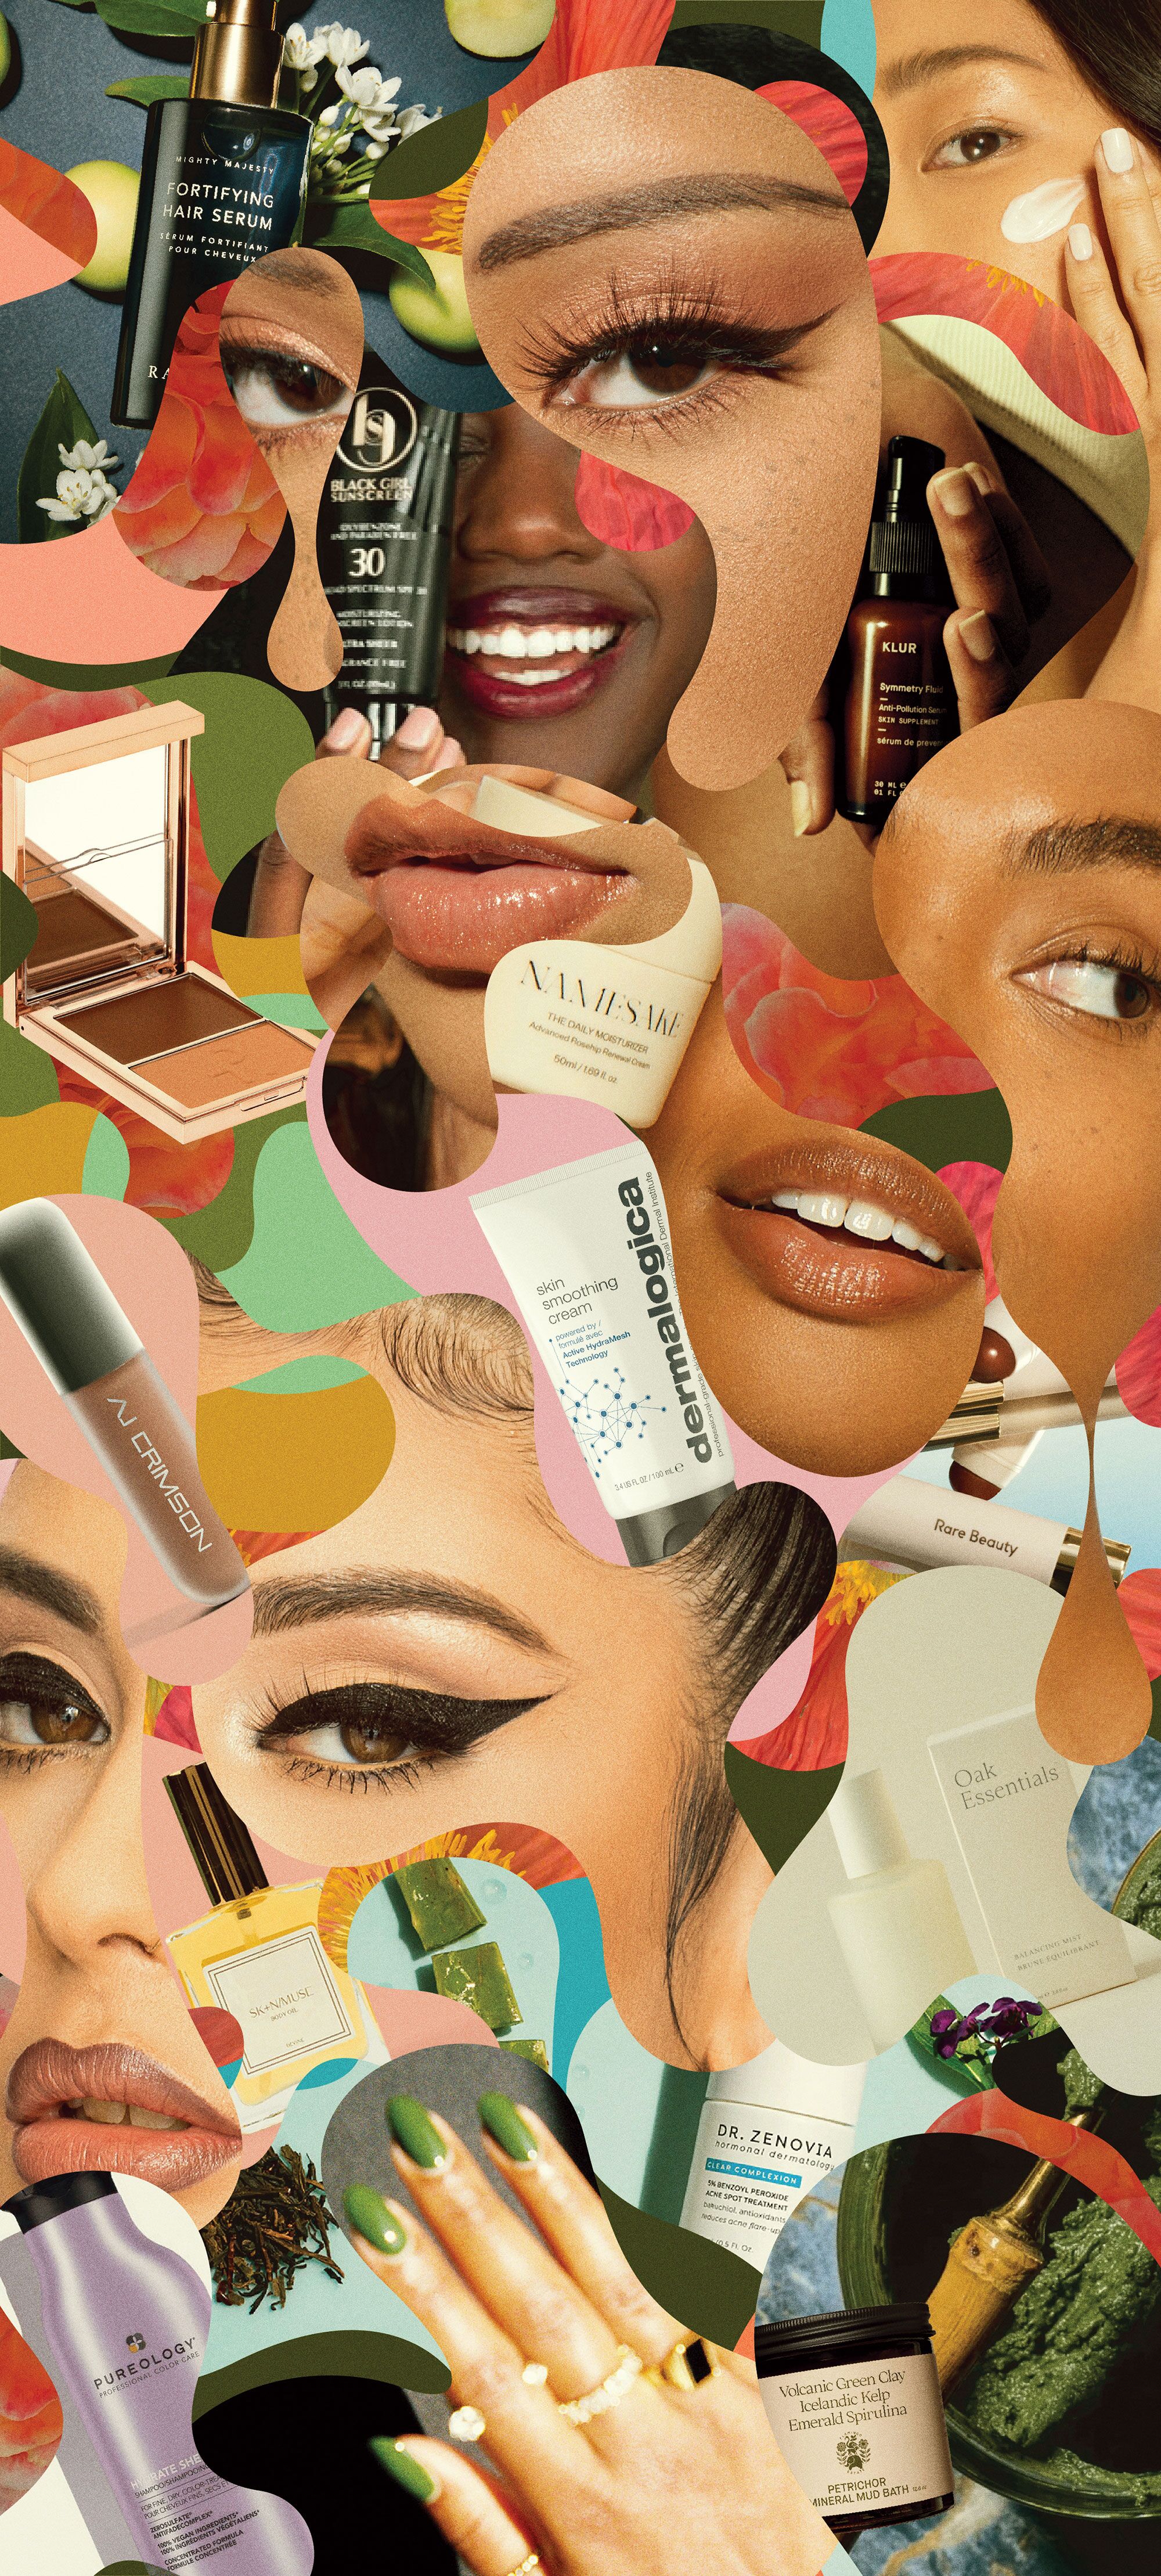 collage of various beauty products and body parts in curved, cutout shapes